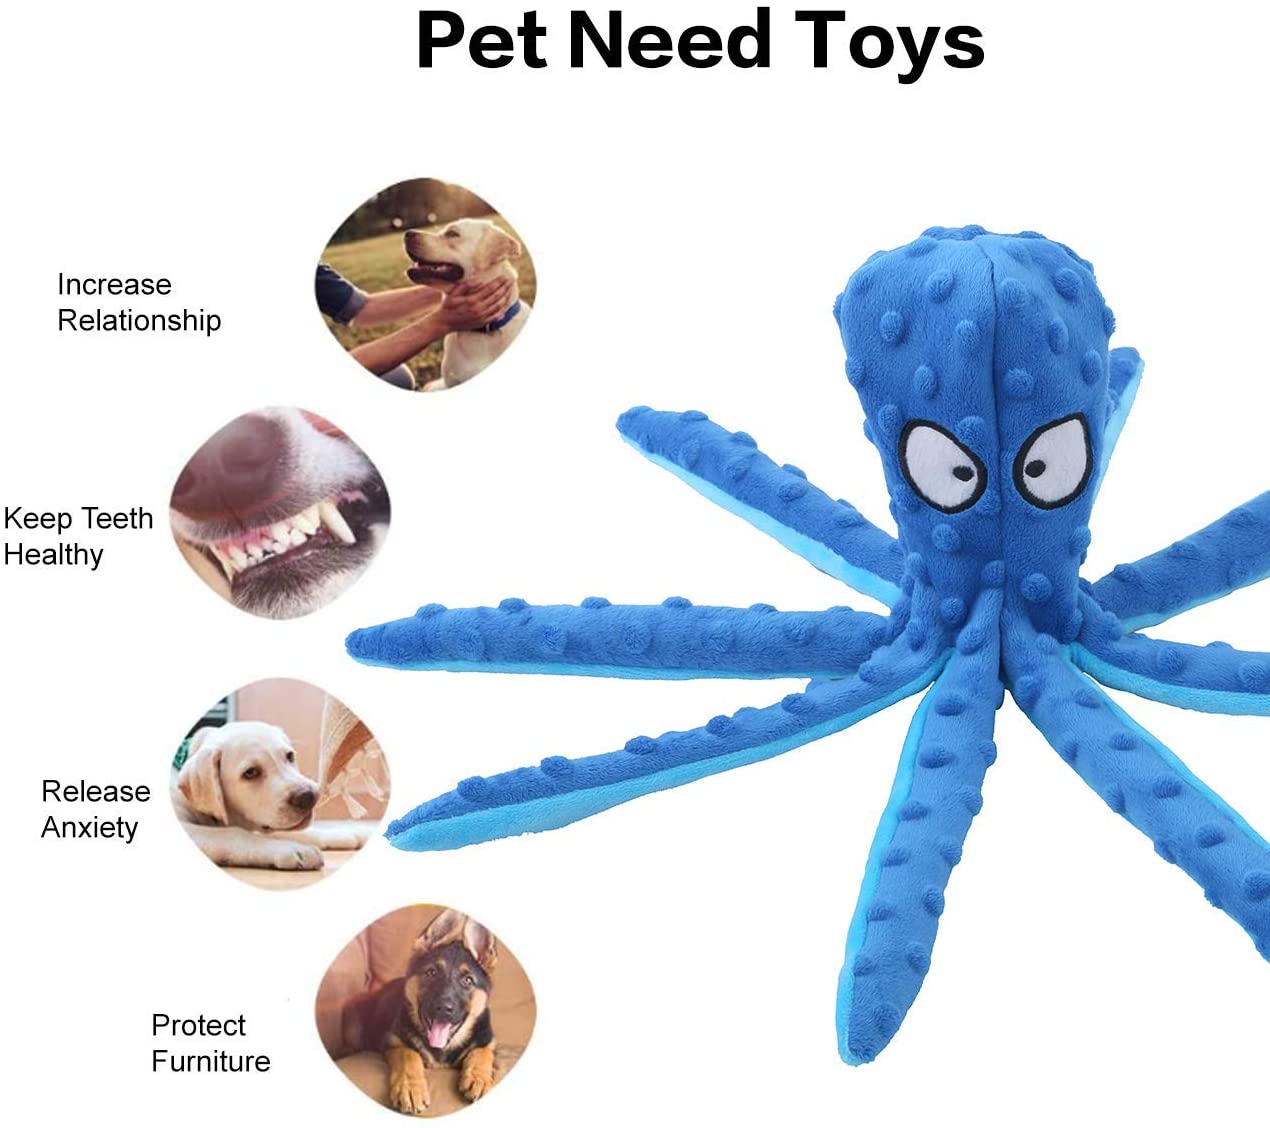 KUTKUT Pack of 2 Dog Squeaky Toys Octopus - No Stuffing Crinkle Plush Dog Toys for Puppy Teething, Durable Interactive Dog Chew Toys for Small to Medium Dogs Training and Reduce Boredom. - ku